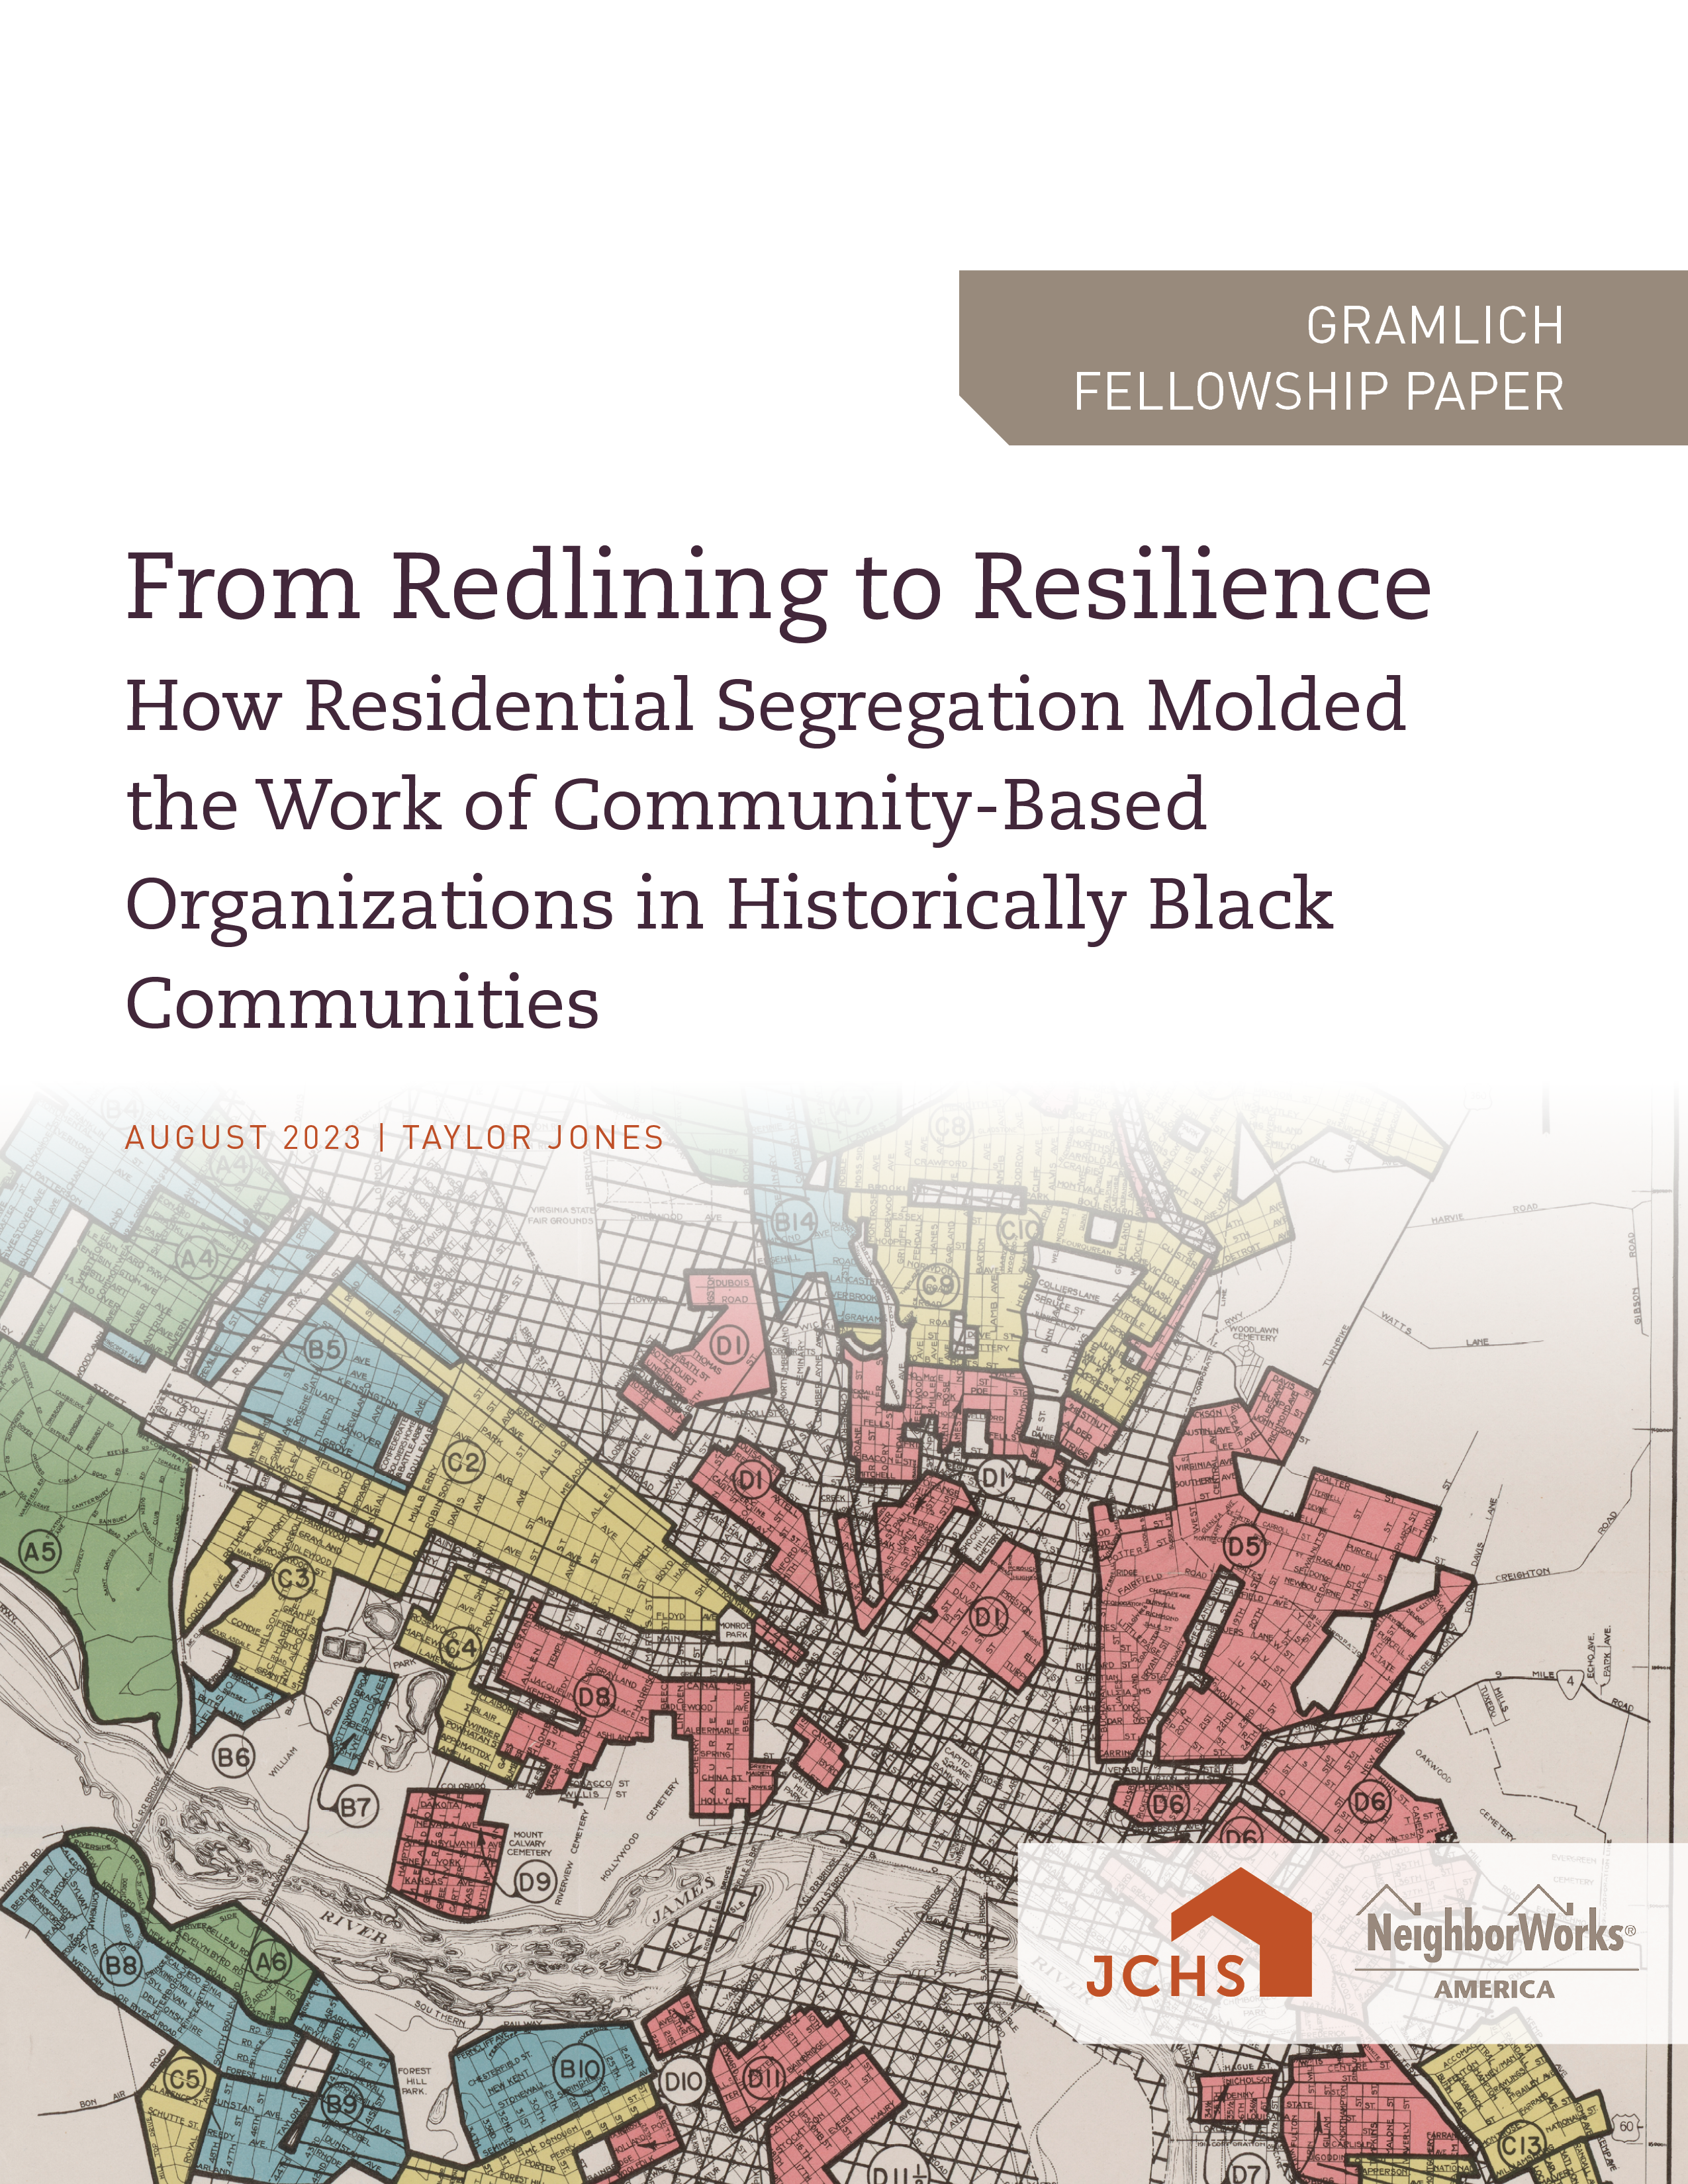 Cover of the paper "From Redlining to Resilience: How Residential Segregation Molded the Work of Community-Based Organizations in Historically Black Communities."